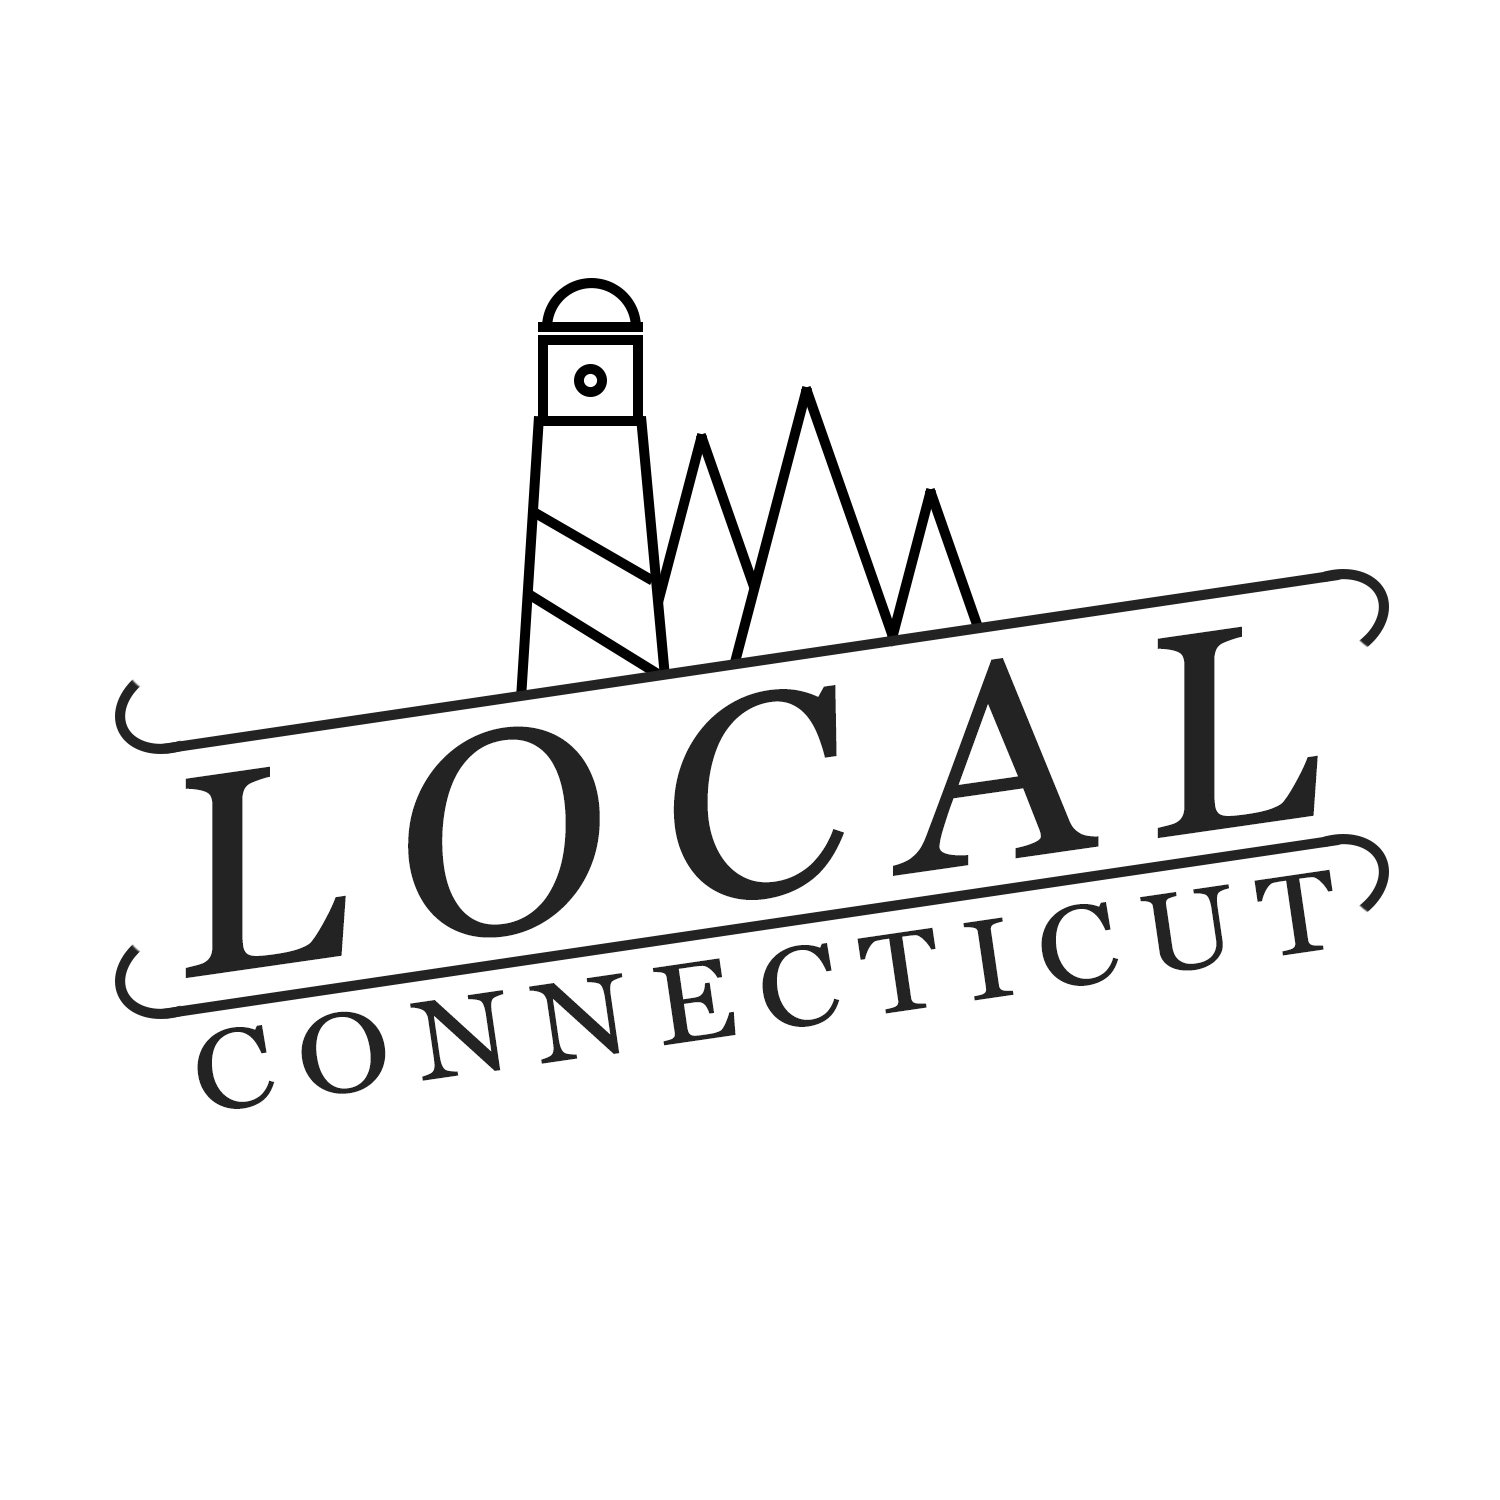 We're your inside look to all things Connecticut from restaurants and shops to events and everything else you need to know.